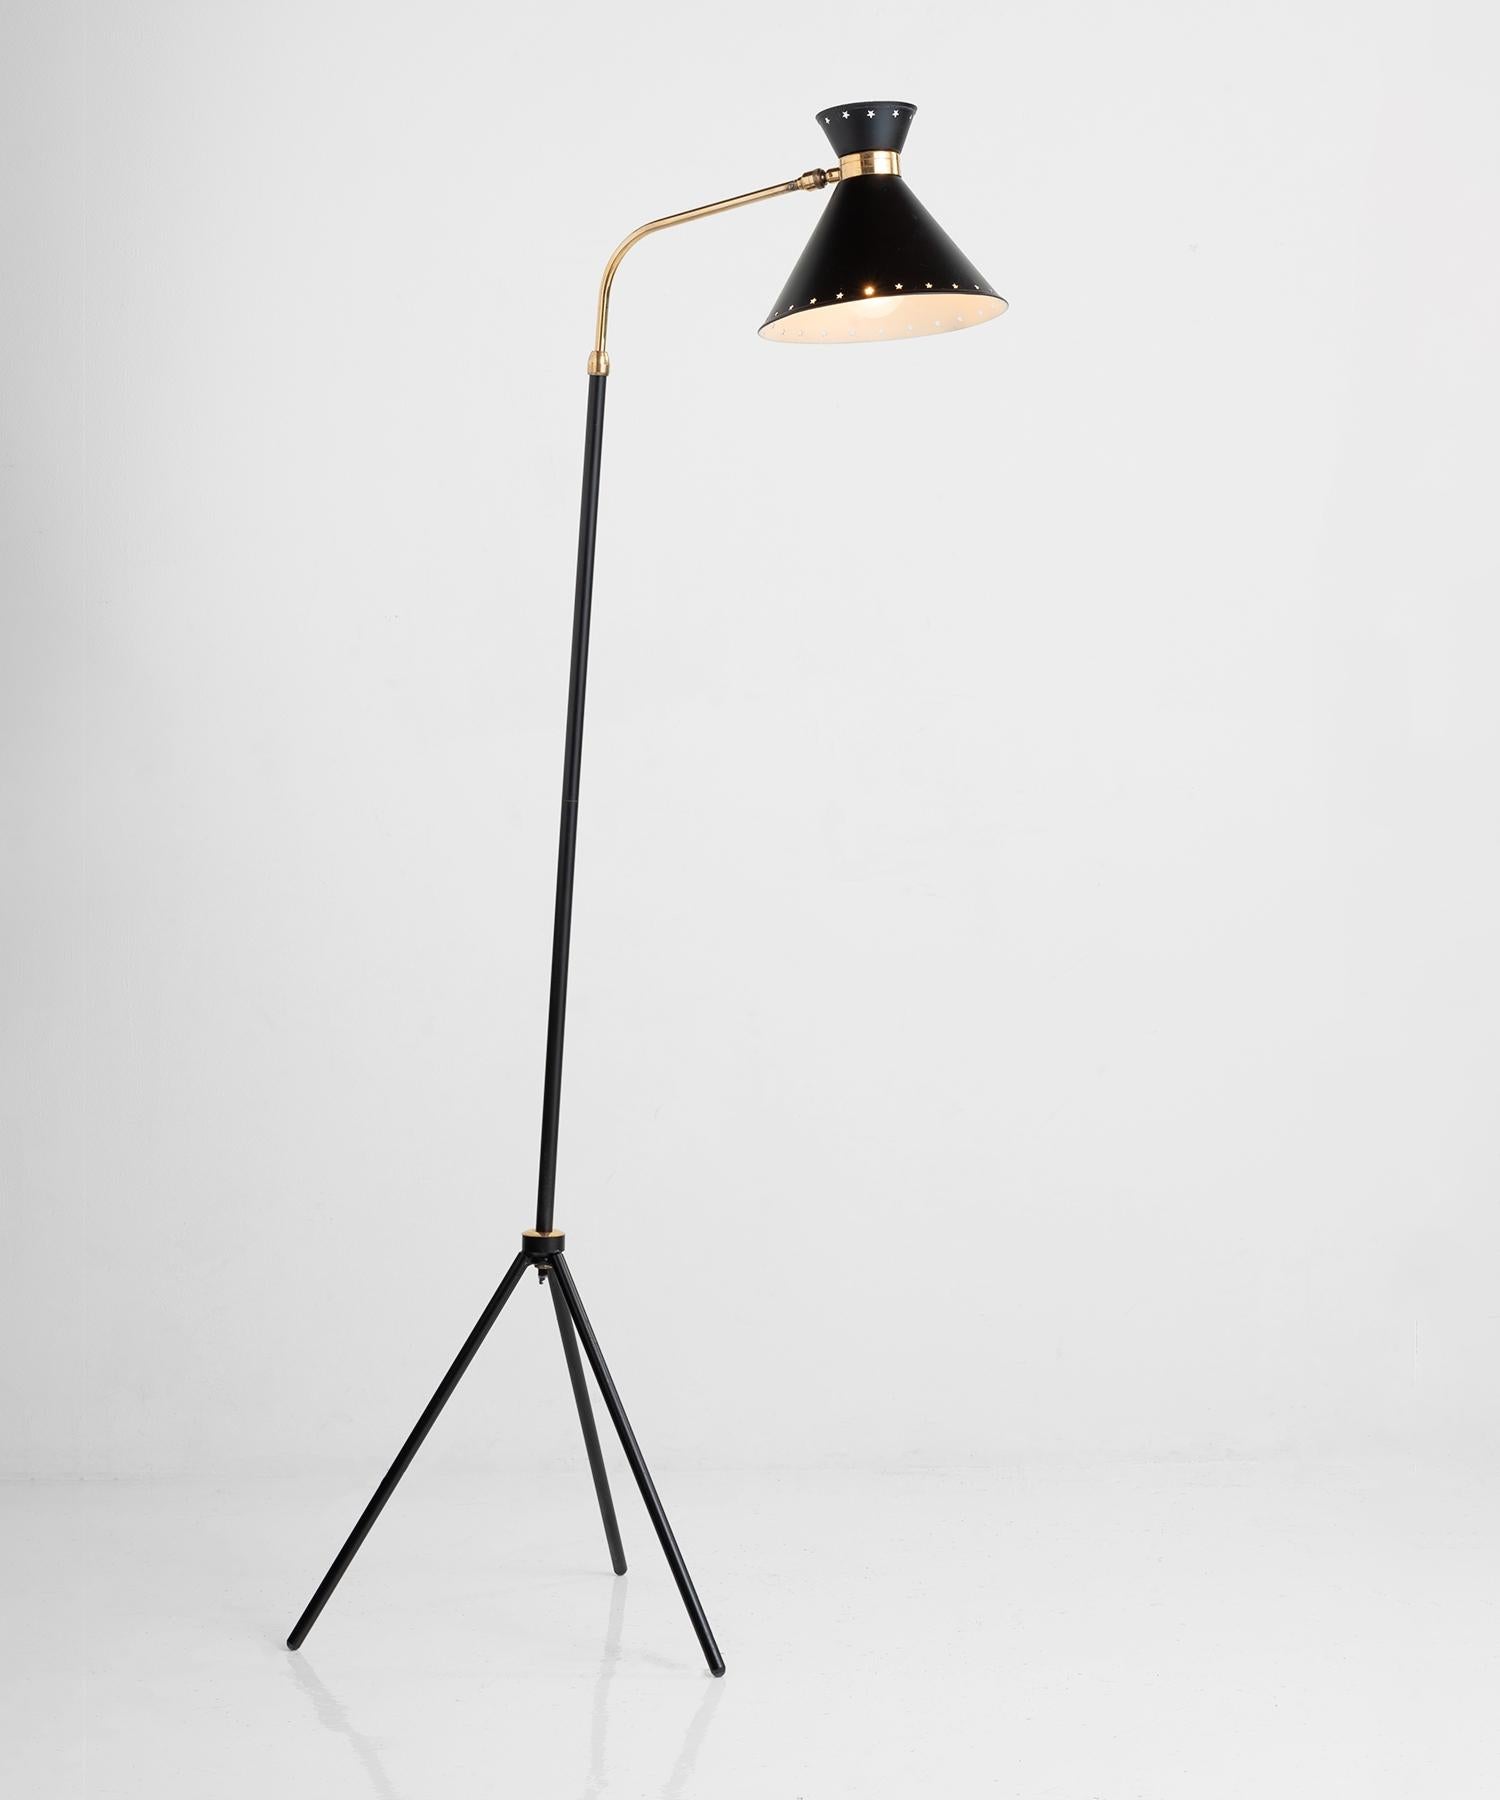 Rene Mathieu floor lamp, France circa 1950.

Black tripod base with brass plated metal neck and perforated black shade. Produced by Lunel.